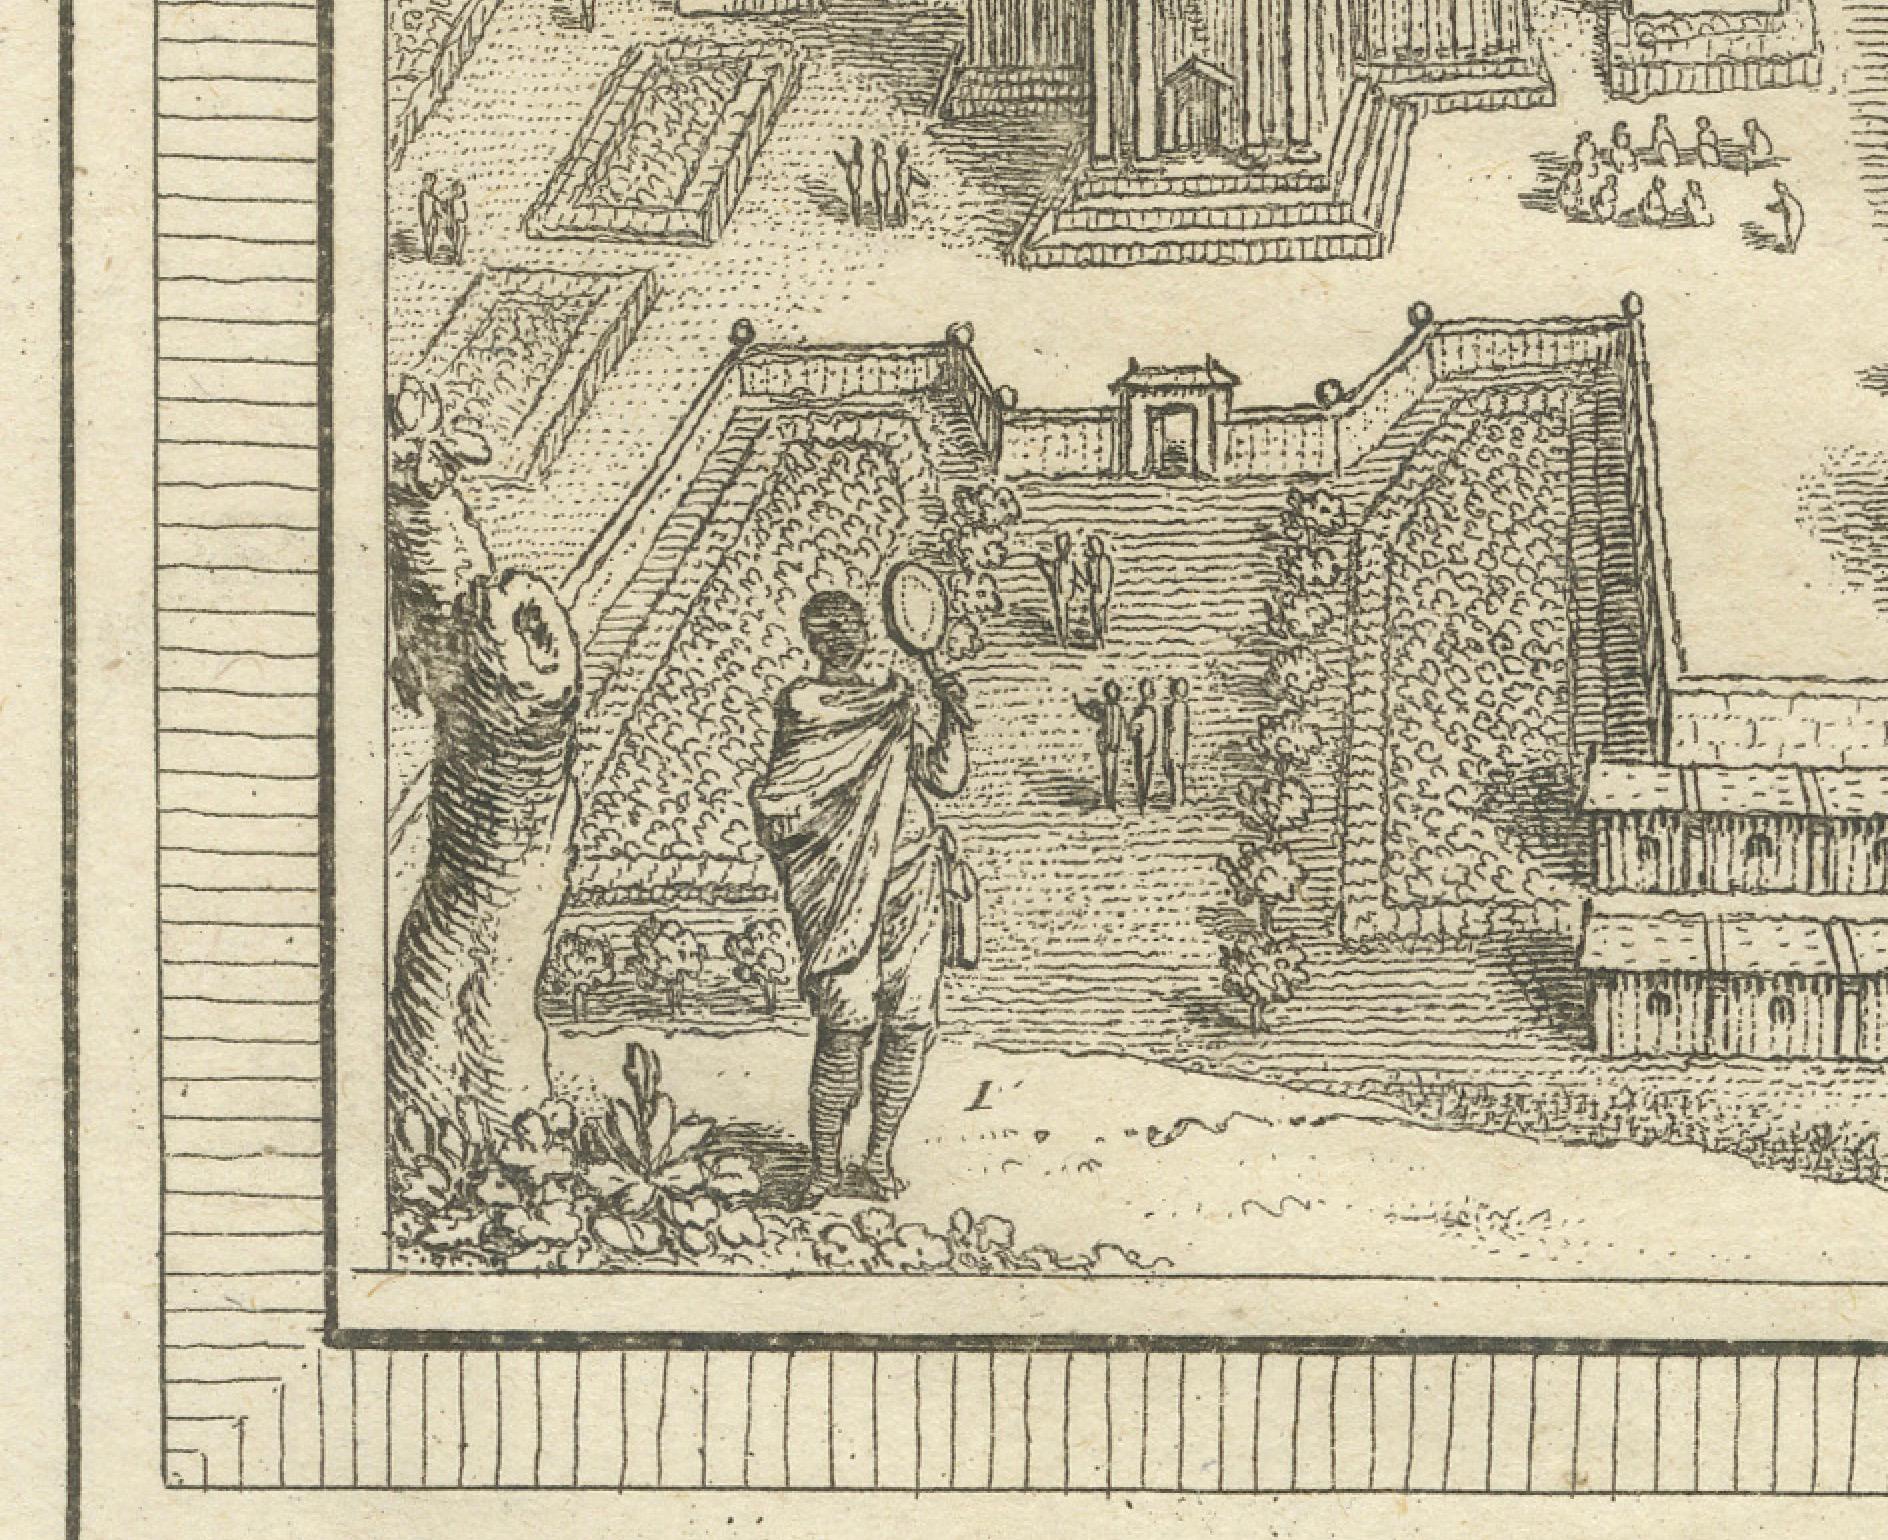 An original antique engraving of two Buddhist temples in Thailand, also known as Siam historically. 

The upper part of the engraving is labeled 